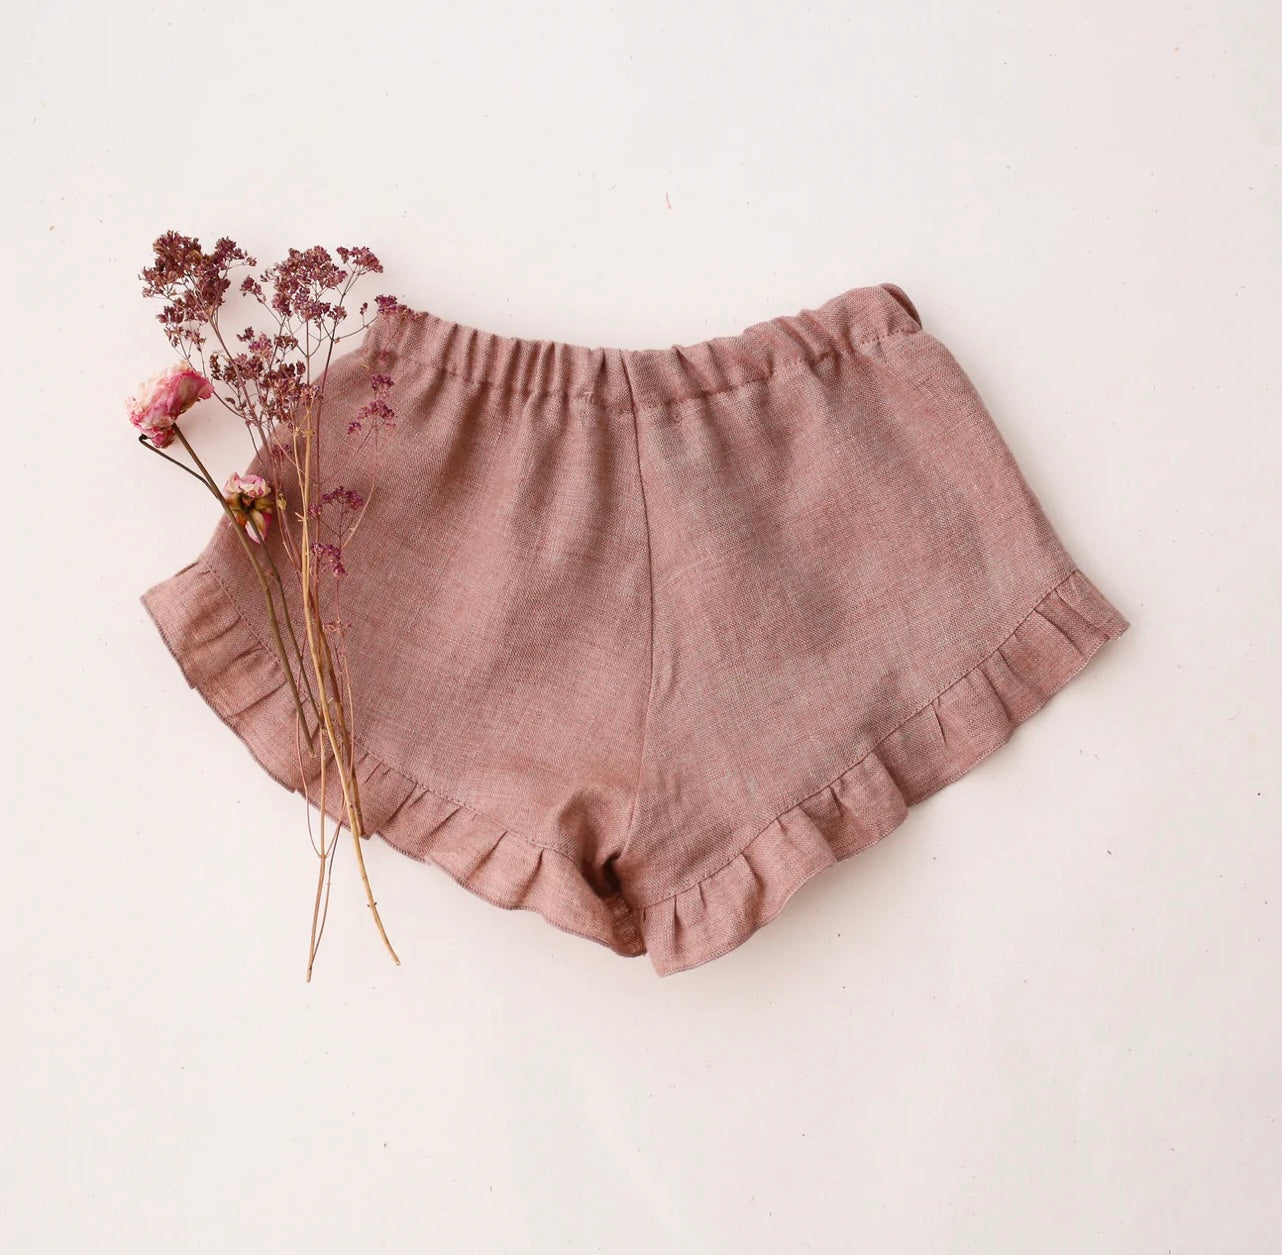 Dannie and Lilou Linen Ruffle Shorts